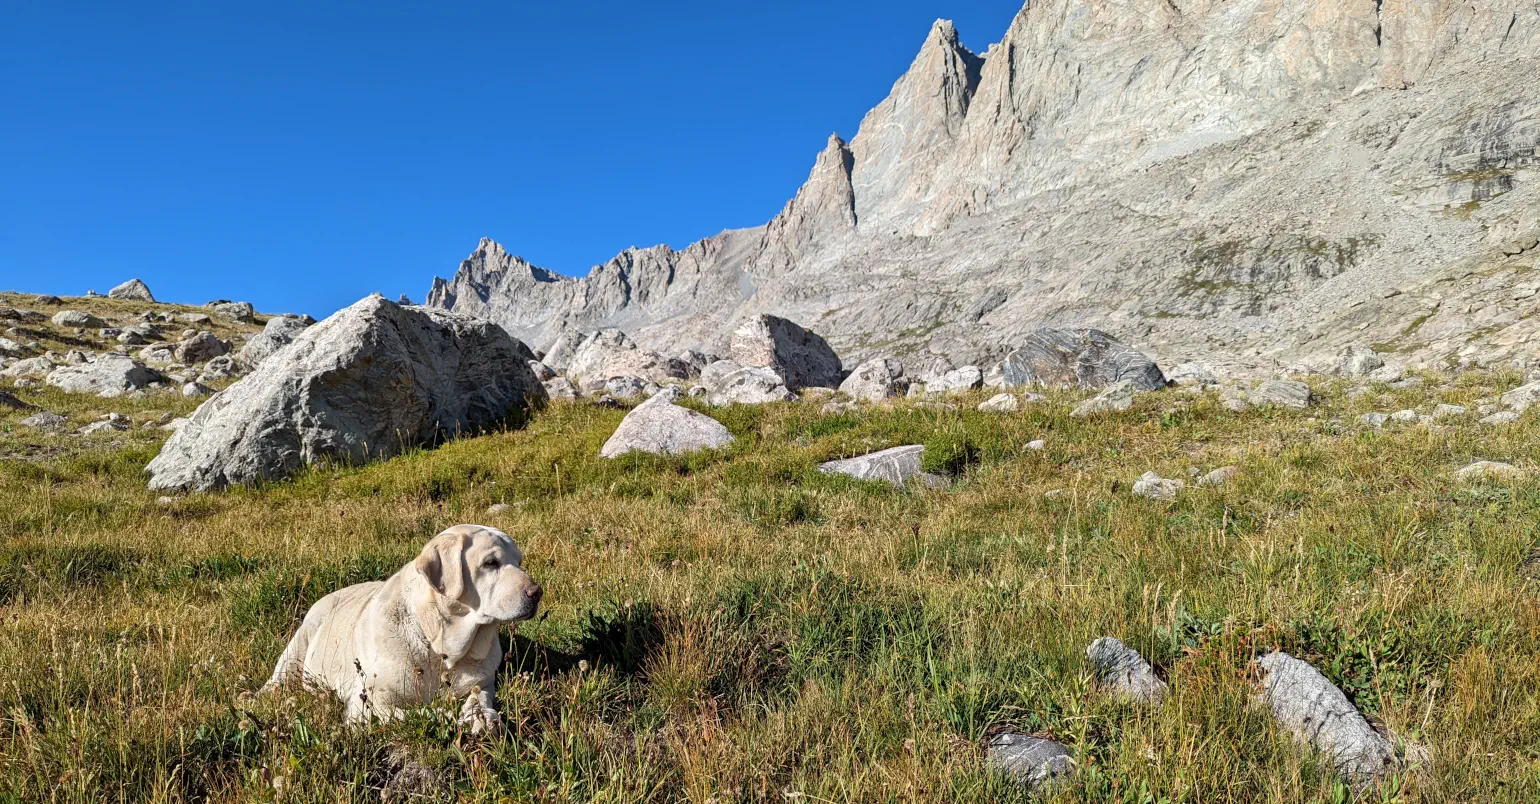 White-haired Labrador dog sitting in mountain field with boulders, and mountain rock wall behind